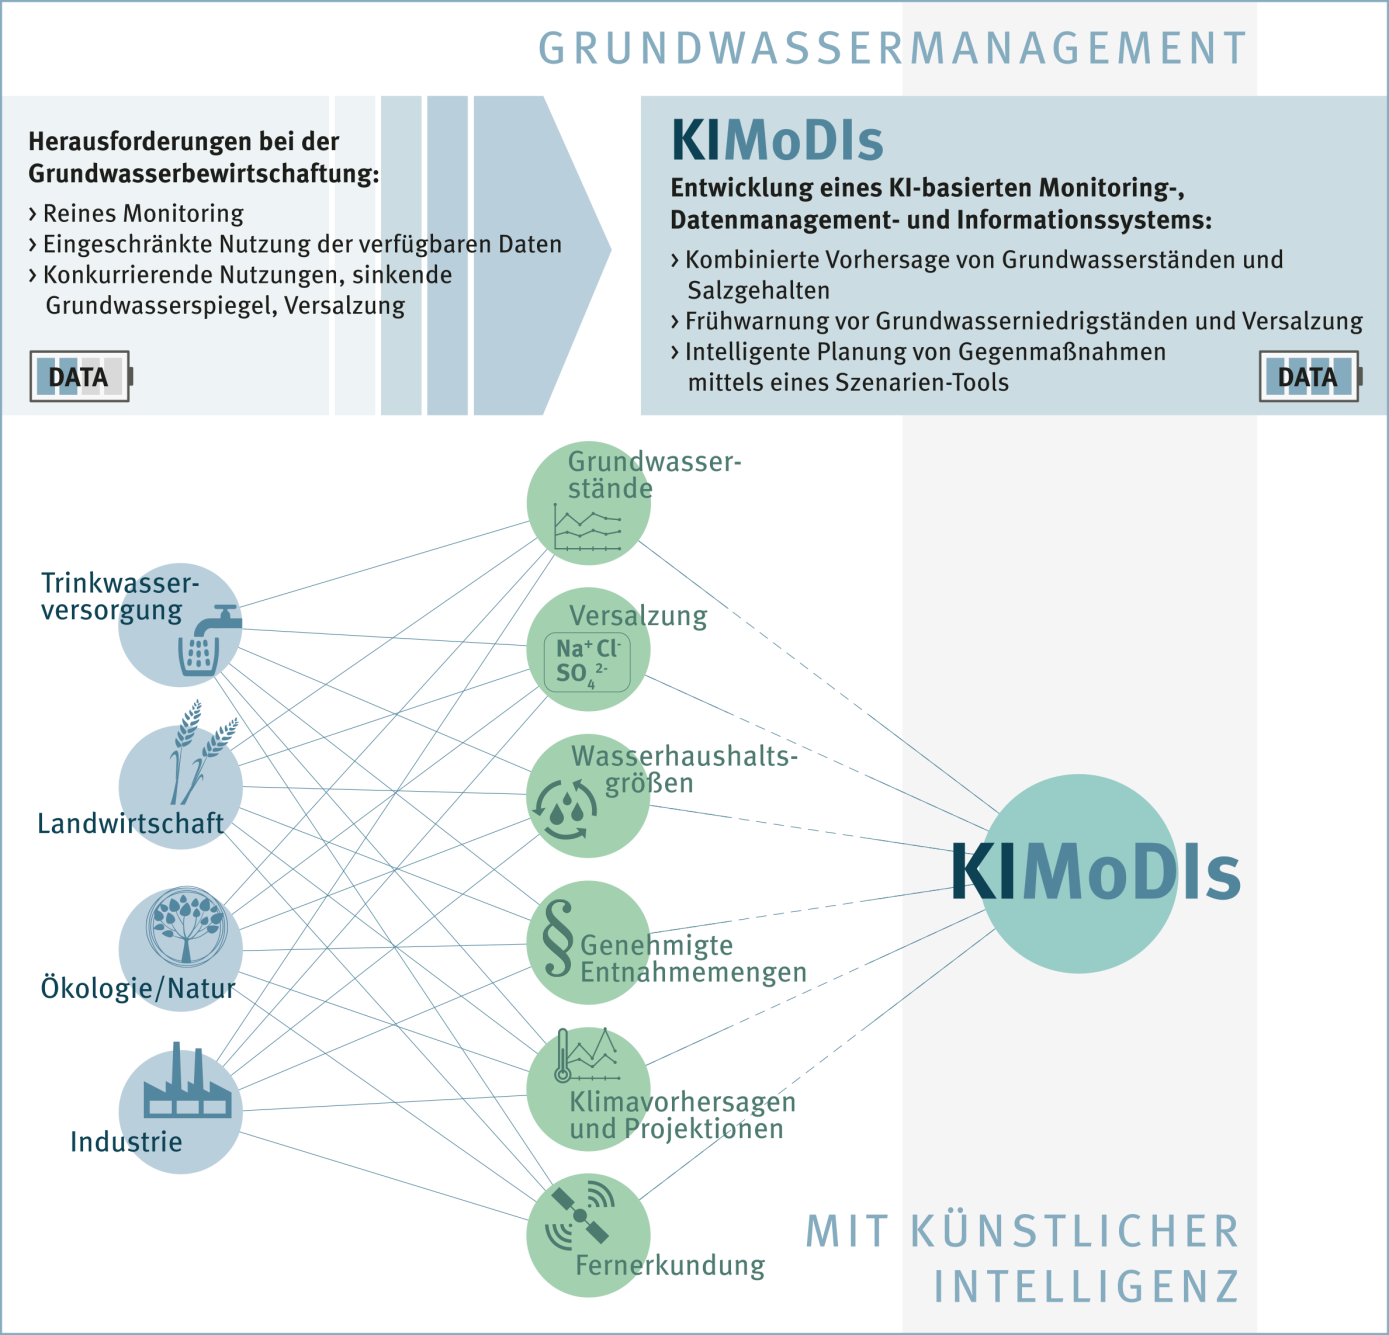 The visual summary of the project approach shows the integration and analysis of all existing data in an AI-based system for sustainable groundwater managementm (Source: BGR)